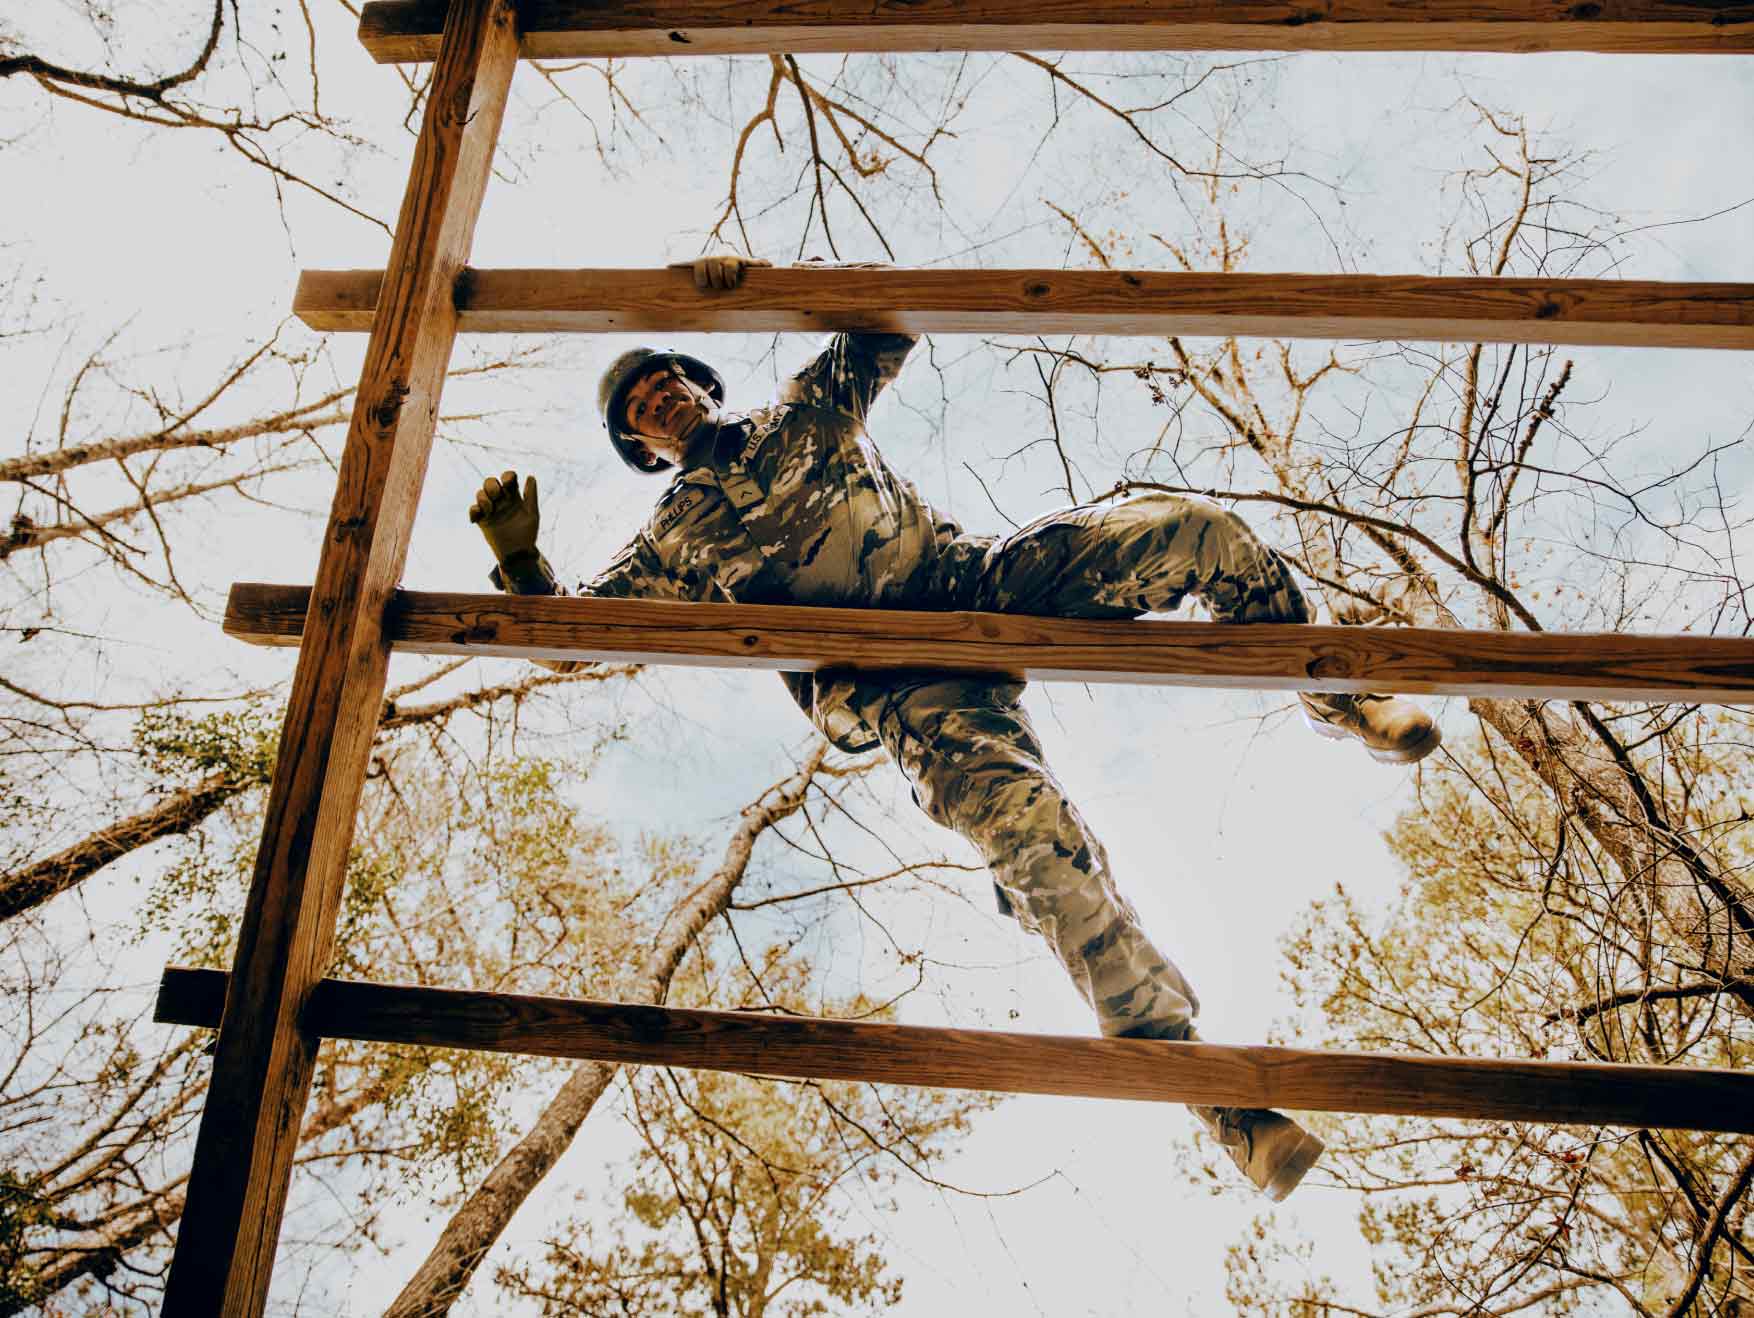 A Soldier in combat uniform climbs up a wooden obstacle on an outdoor obstacle course